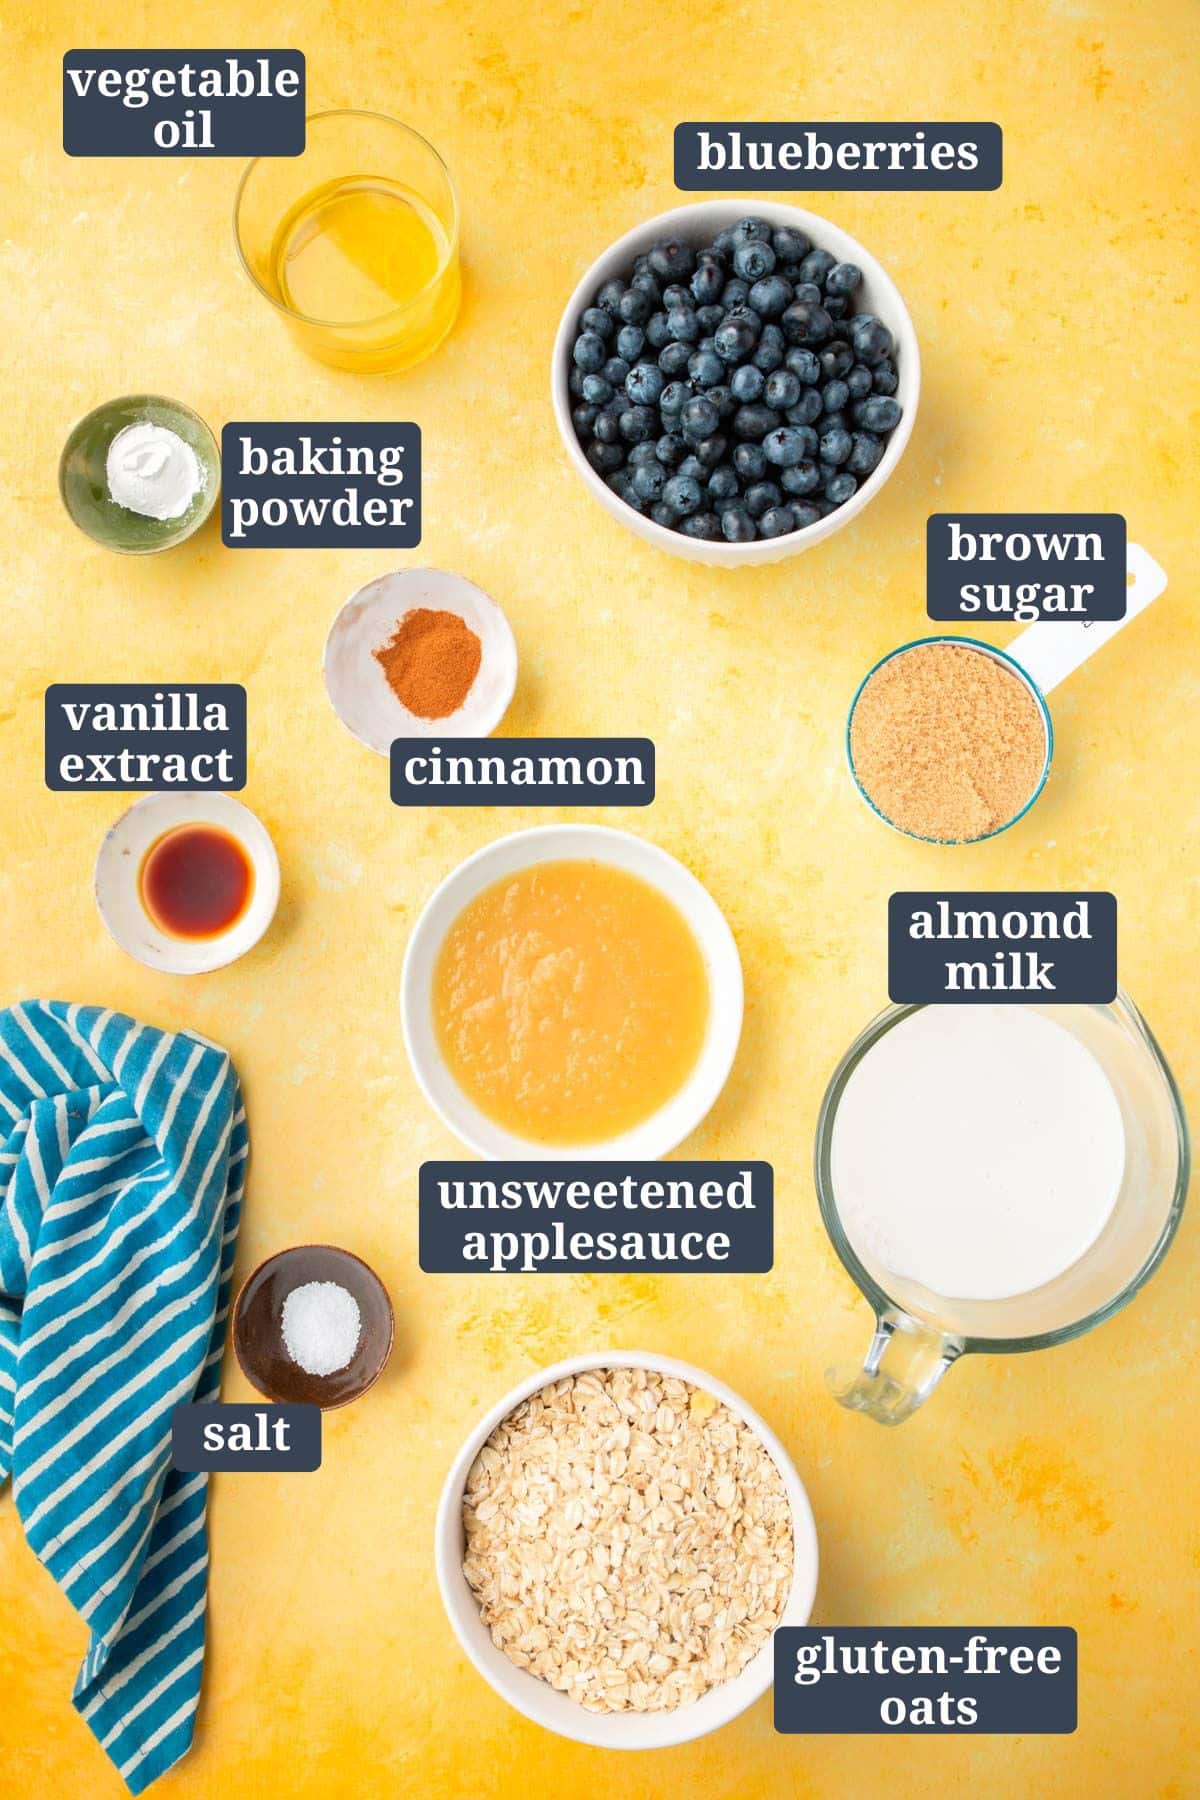 Small bowls of ingredients on a yellow table to make blueberry baked oatmeal, including vegetable oil, baking powder, vanilla extract, brown sugar, unsweetened applesauce, almond milk, cinnamon, and gluten-free oats.